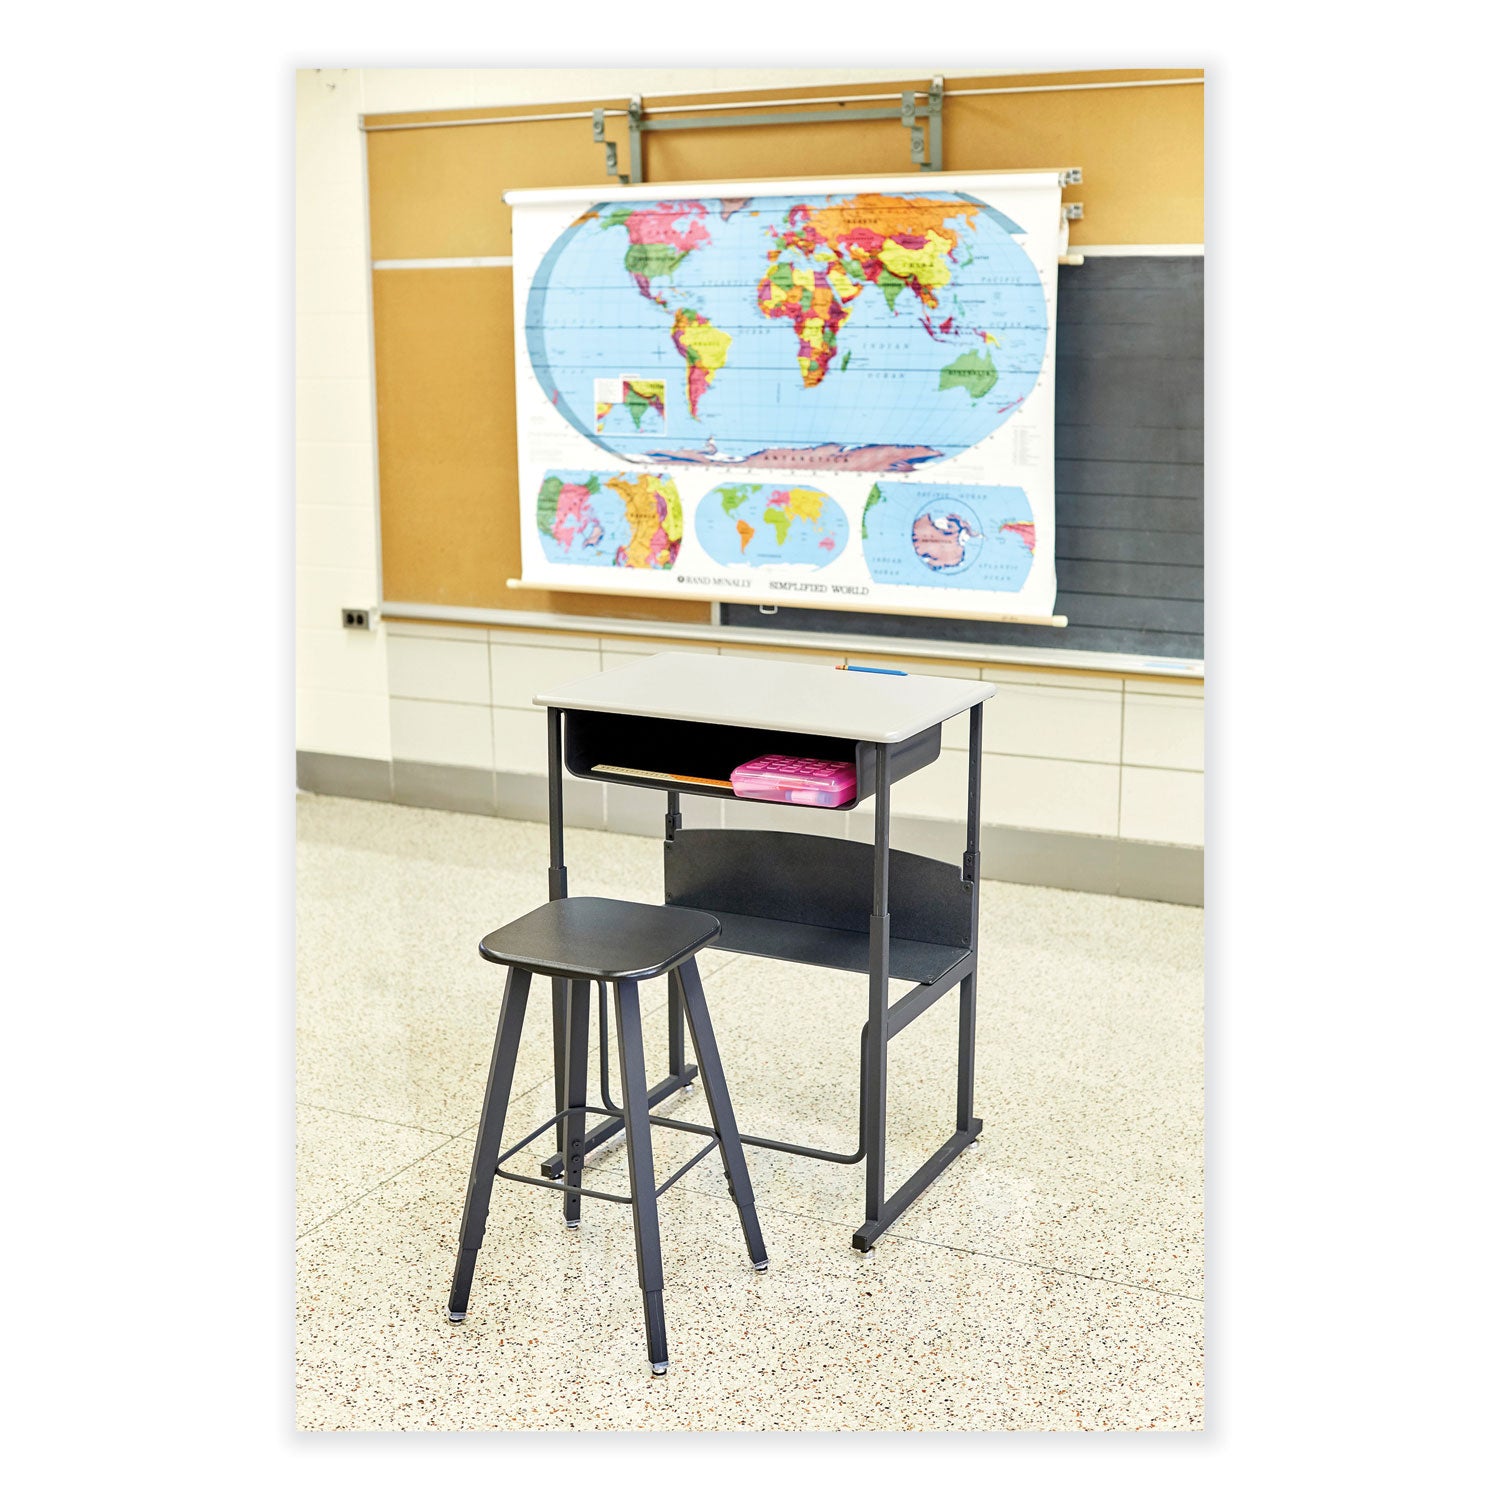 alphabetter-adjustable-height-student-stool-backless-supports-up-to-250-lb-355-seat-height-black_saf1205bl - 3